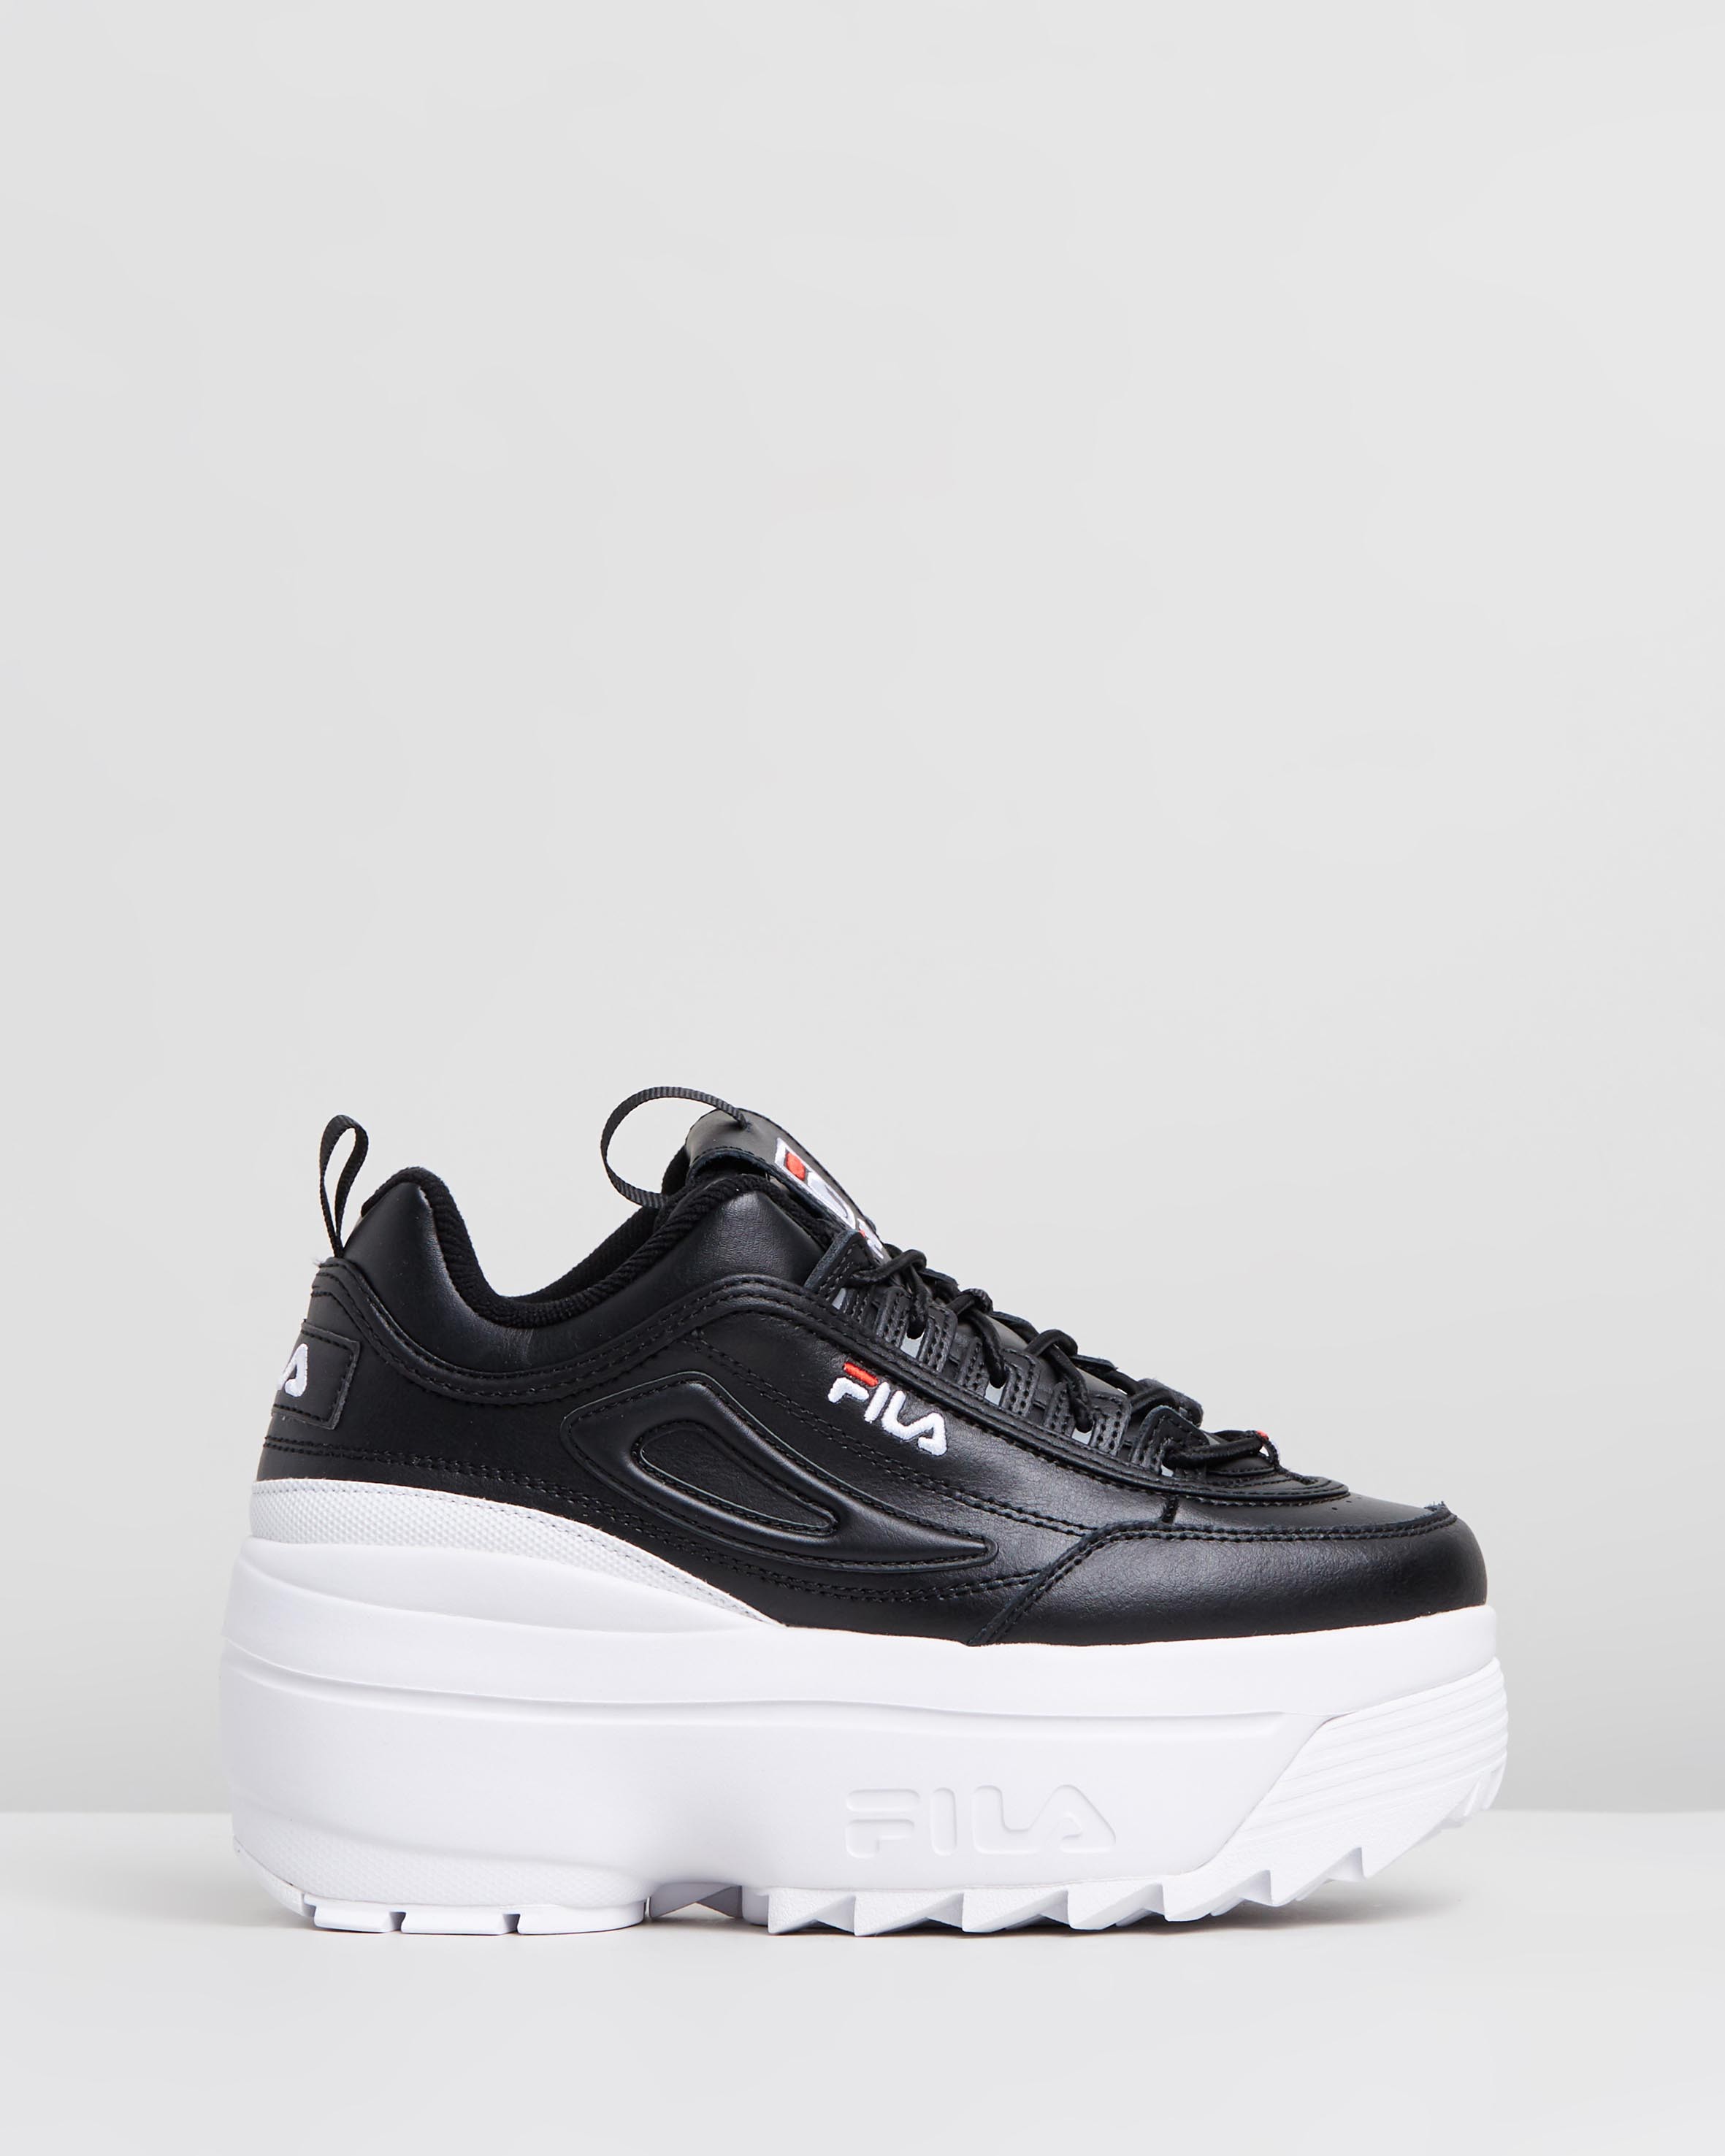 Disruptor II Wedges Black, Fila Red & White by Fila | ShoeSales